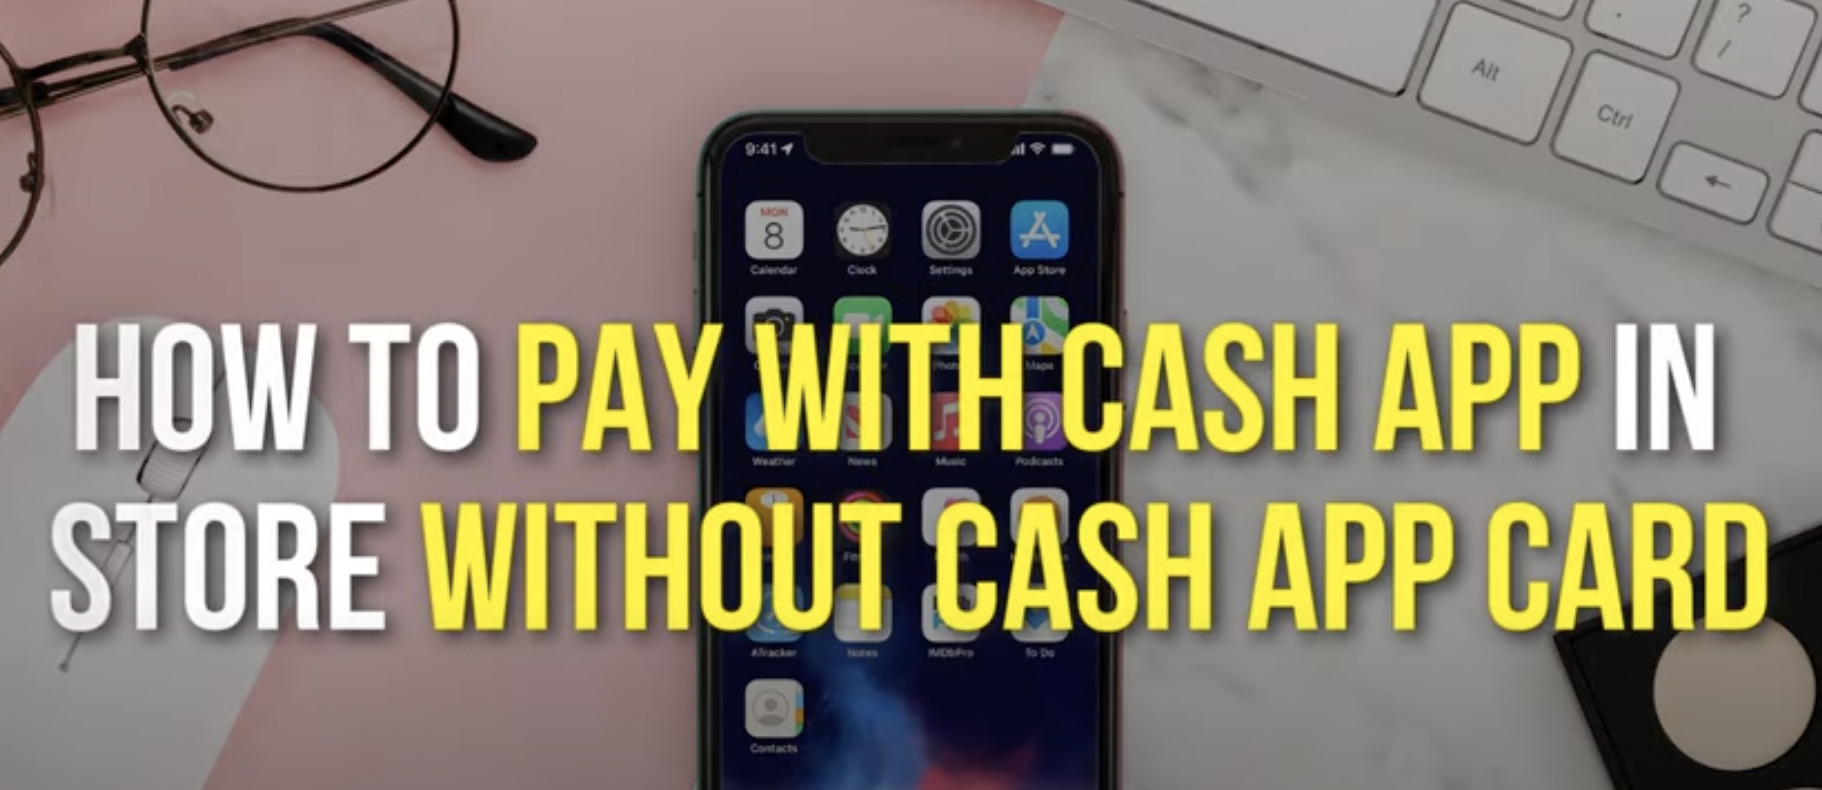 How to Use Cash App in Store Without Card